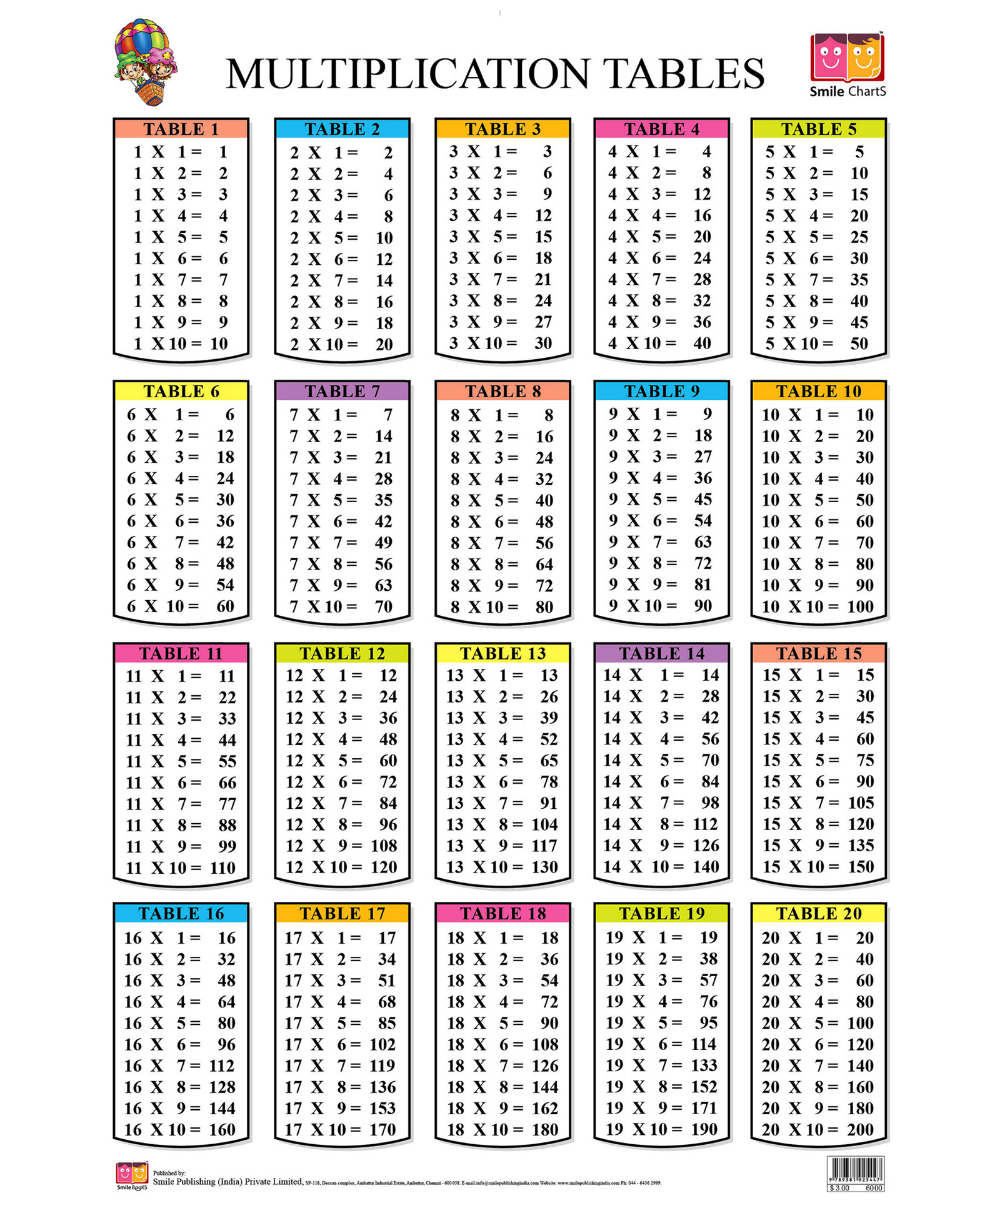 Multiplication Tables From 1 To 20 For Students 2019 